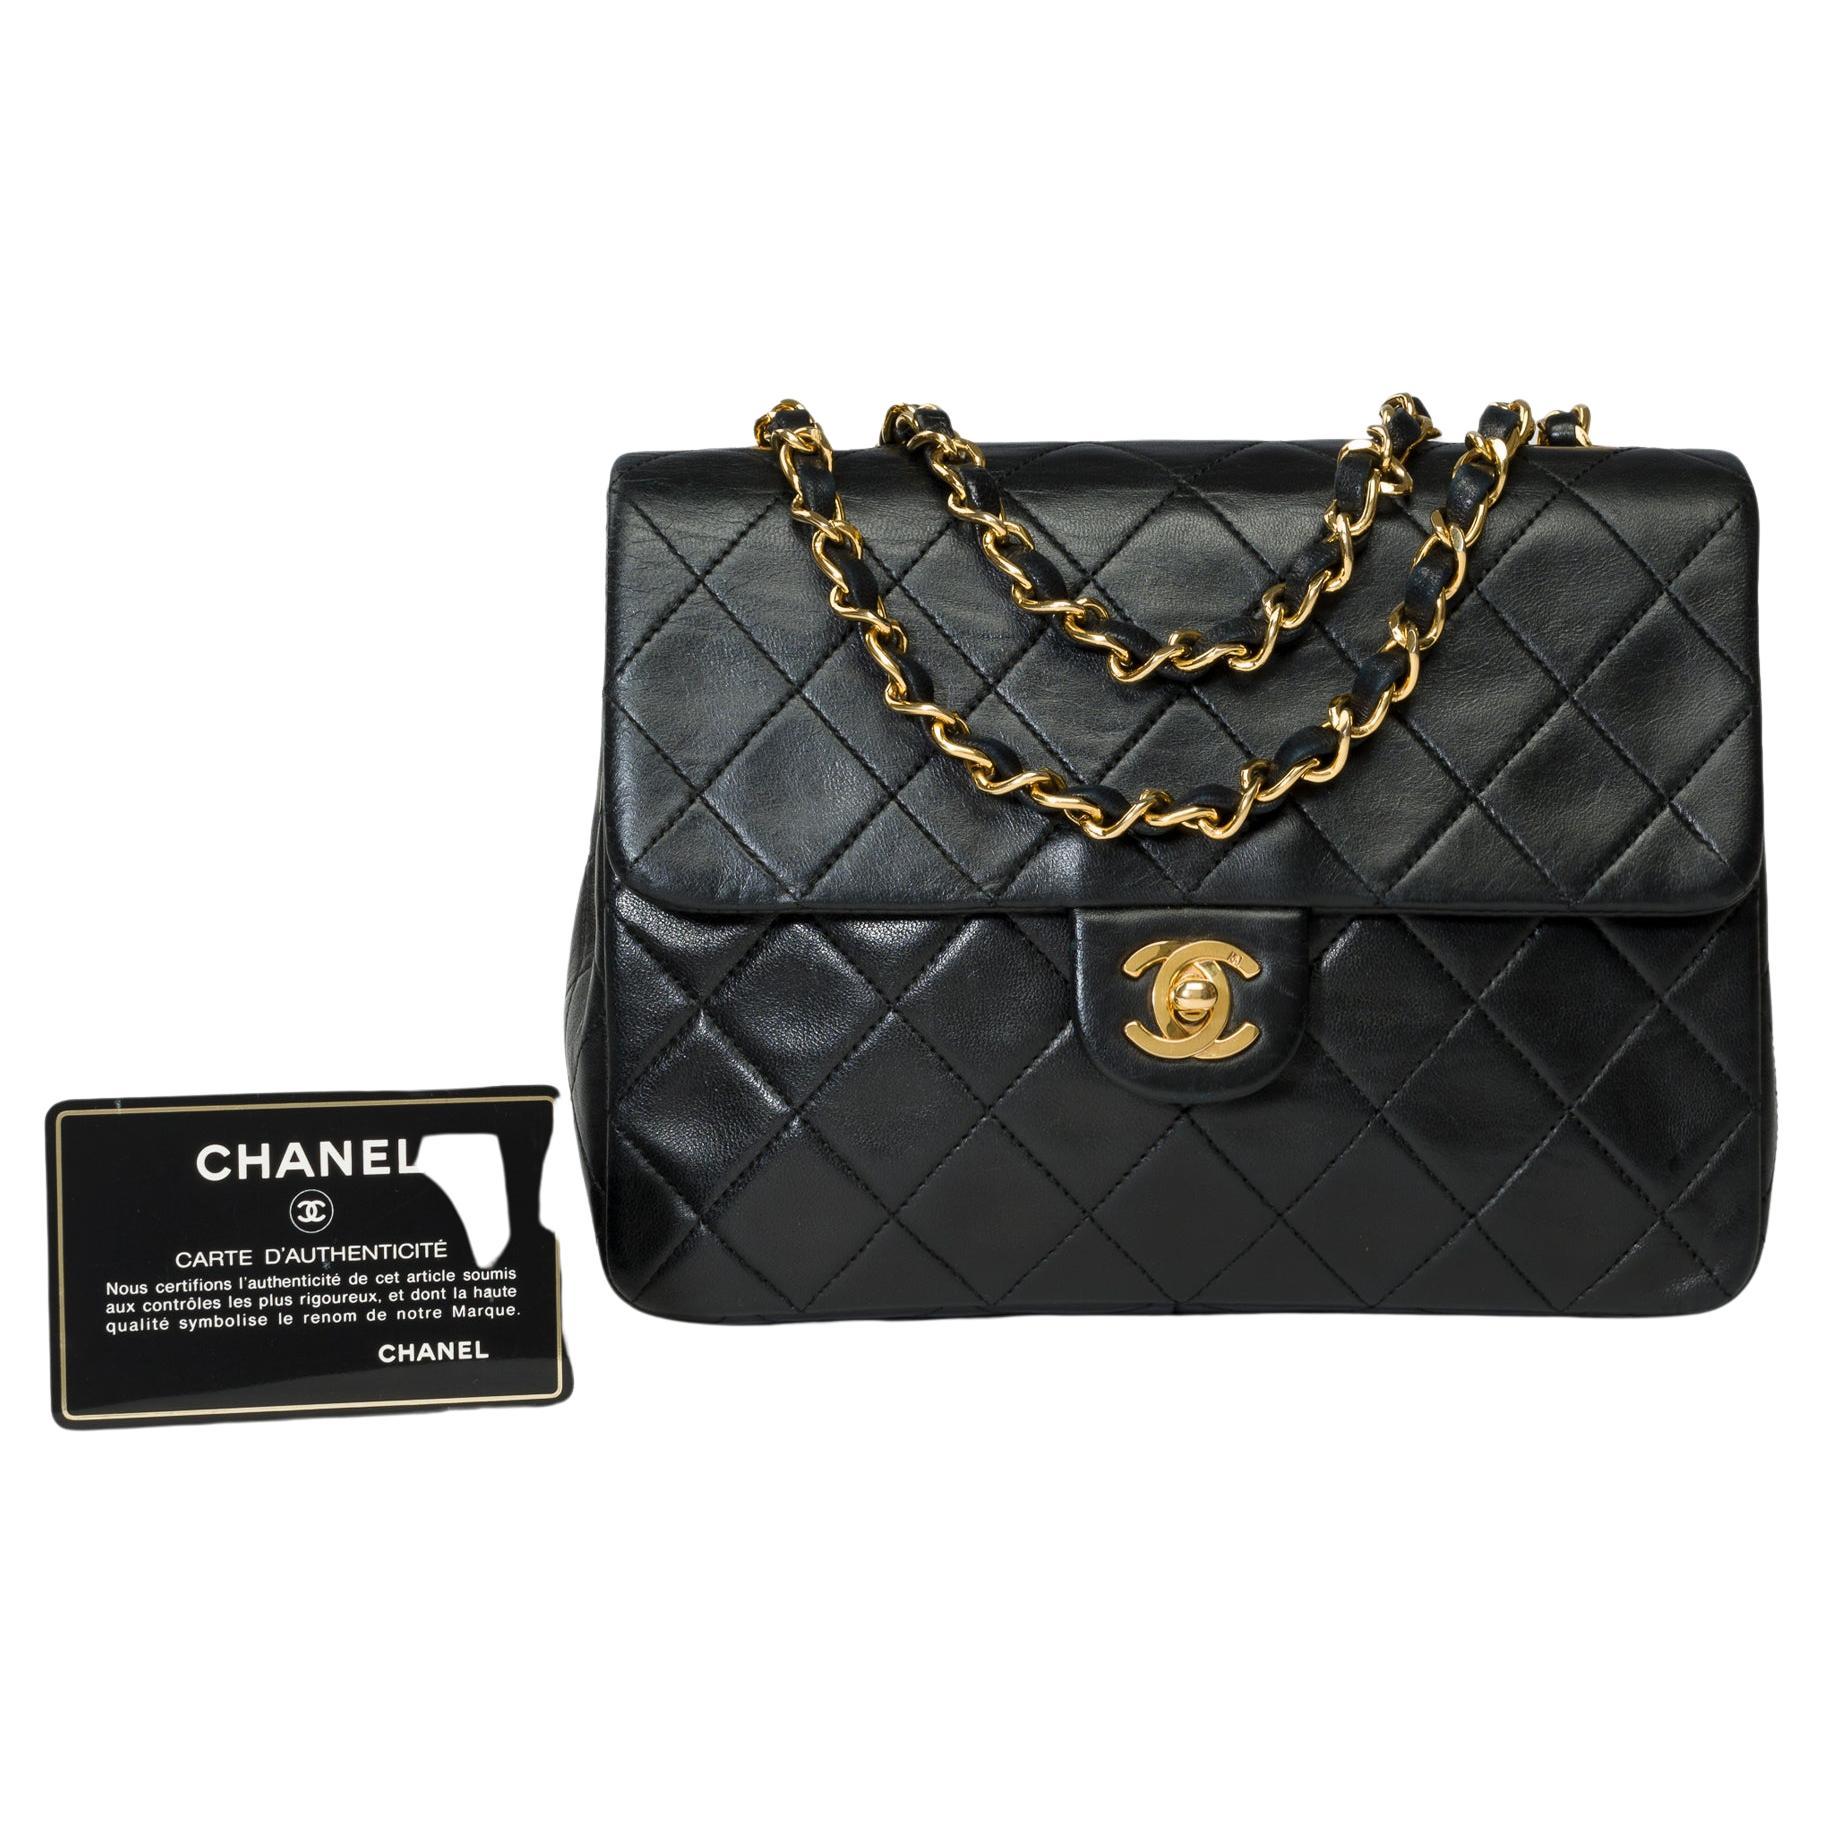 Gorgeous Chanel Timeless Mini shoulder flap bag in black quilted lambskin, GHW